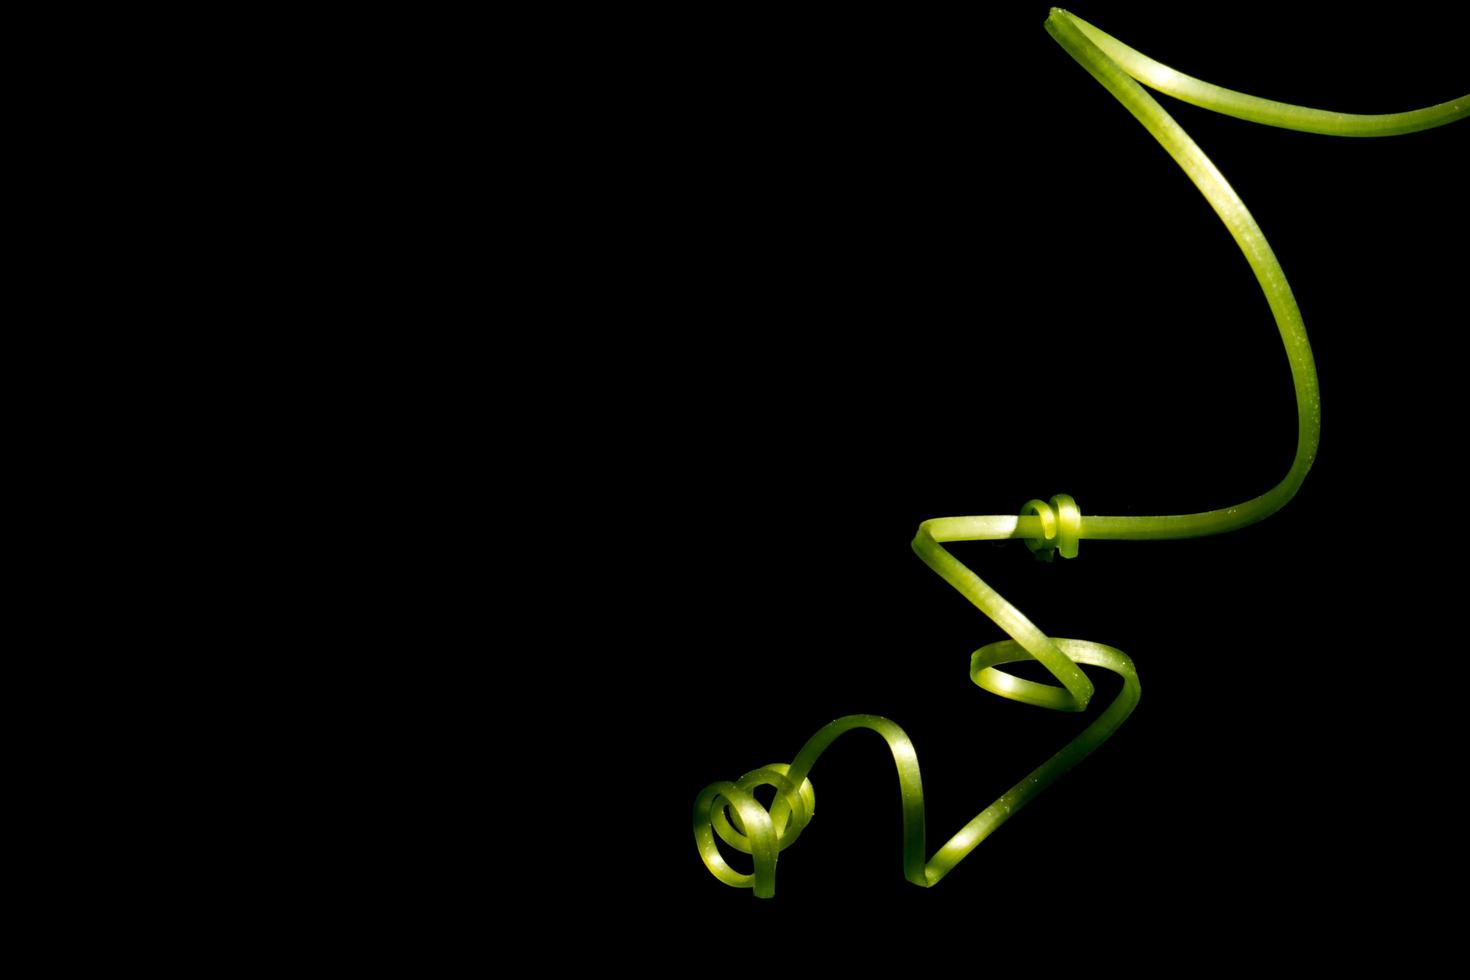 Top of a gourd on a black background photo